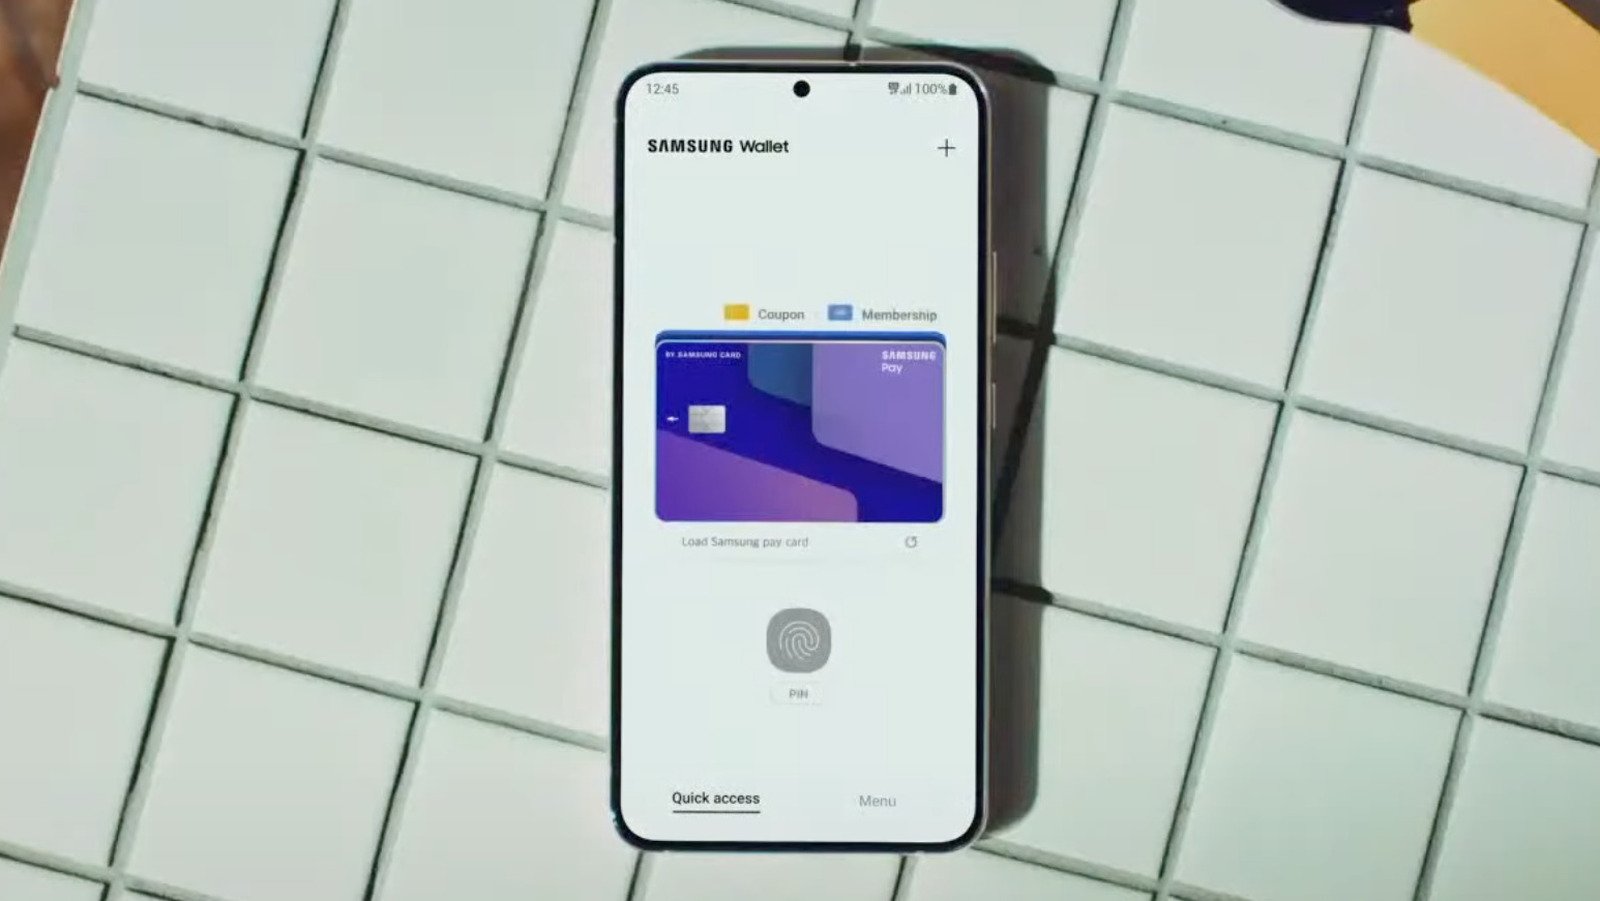 Samsung Wallet combines the features of Pay and Pass apps